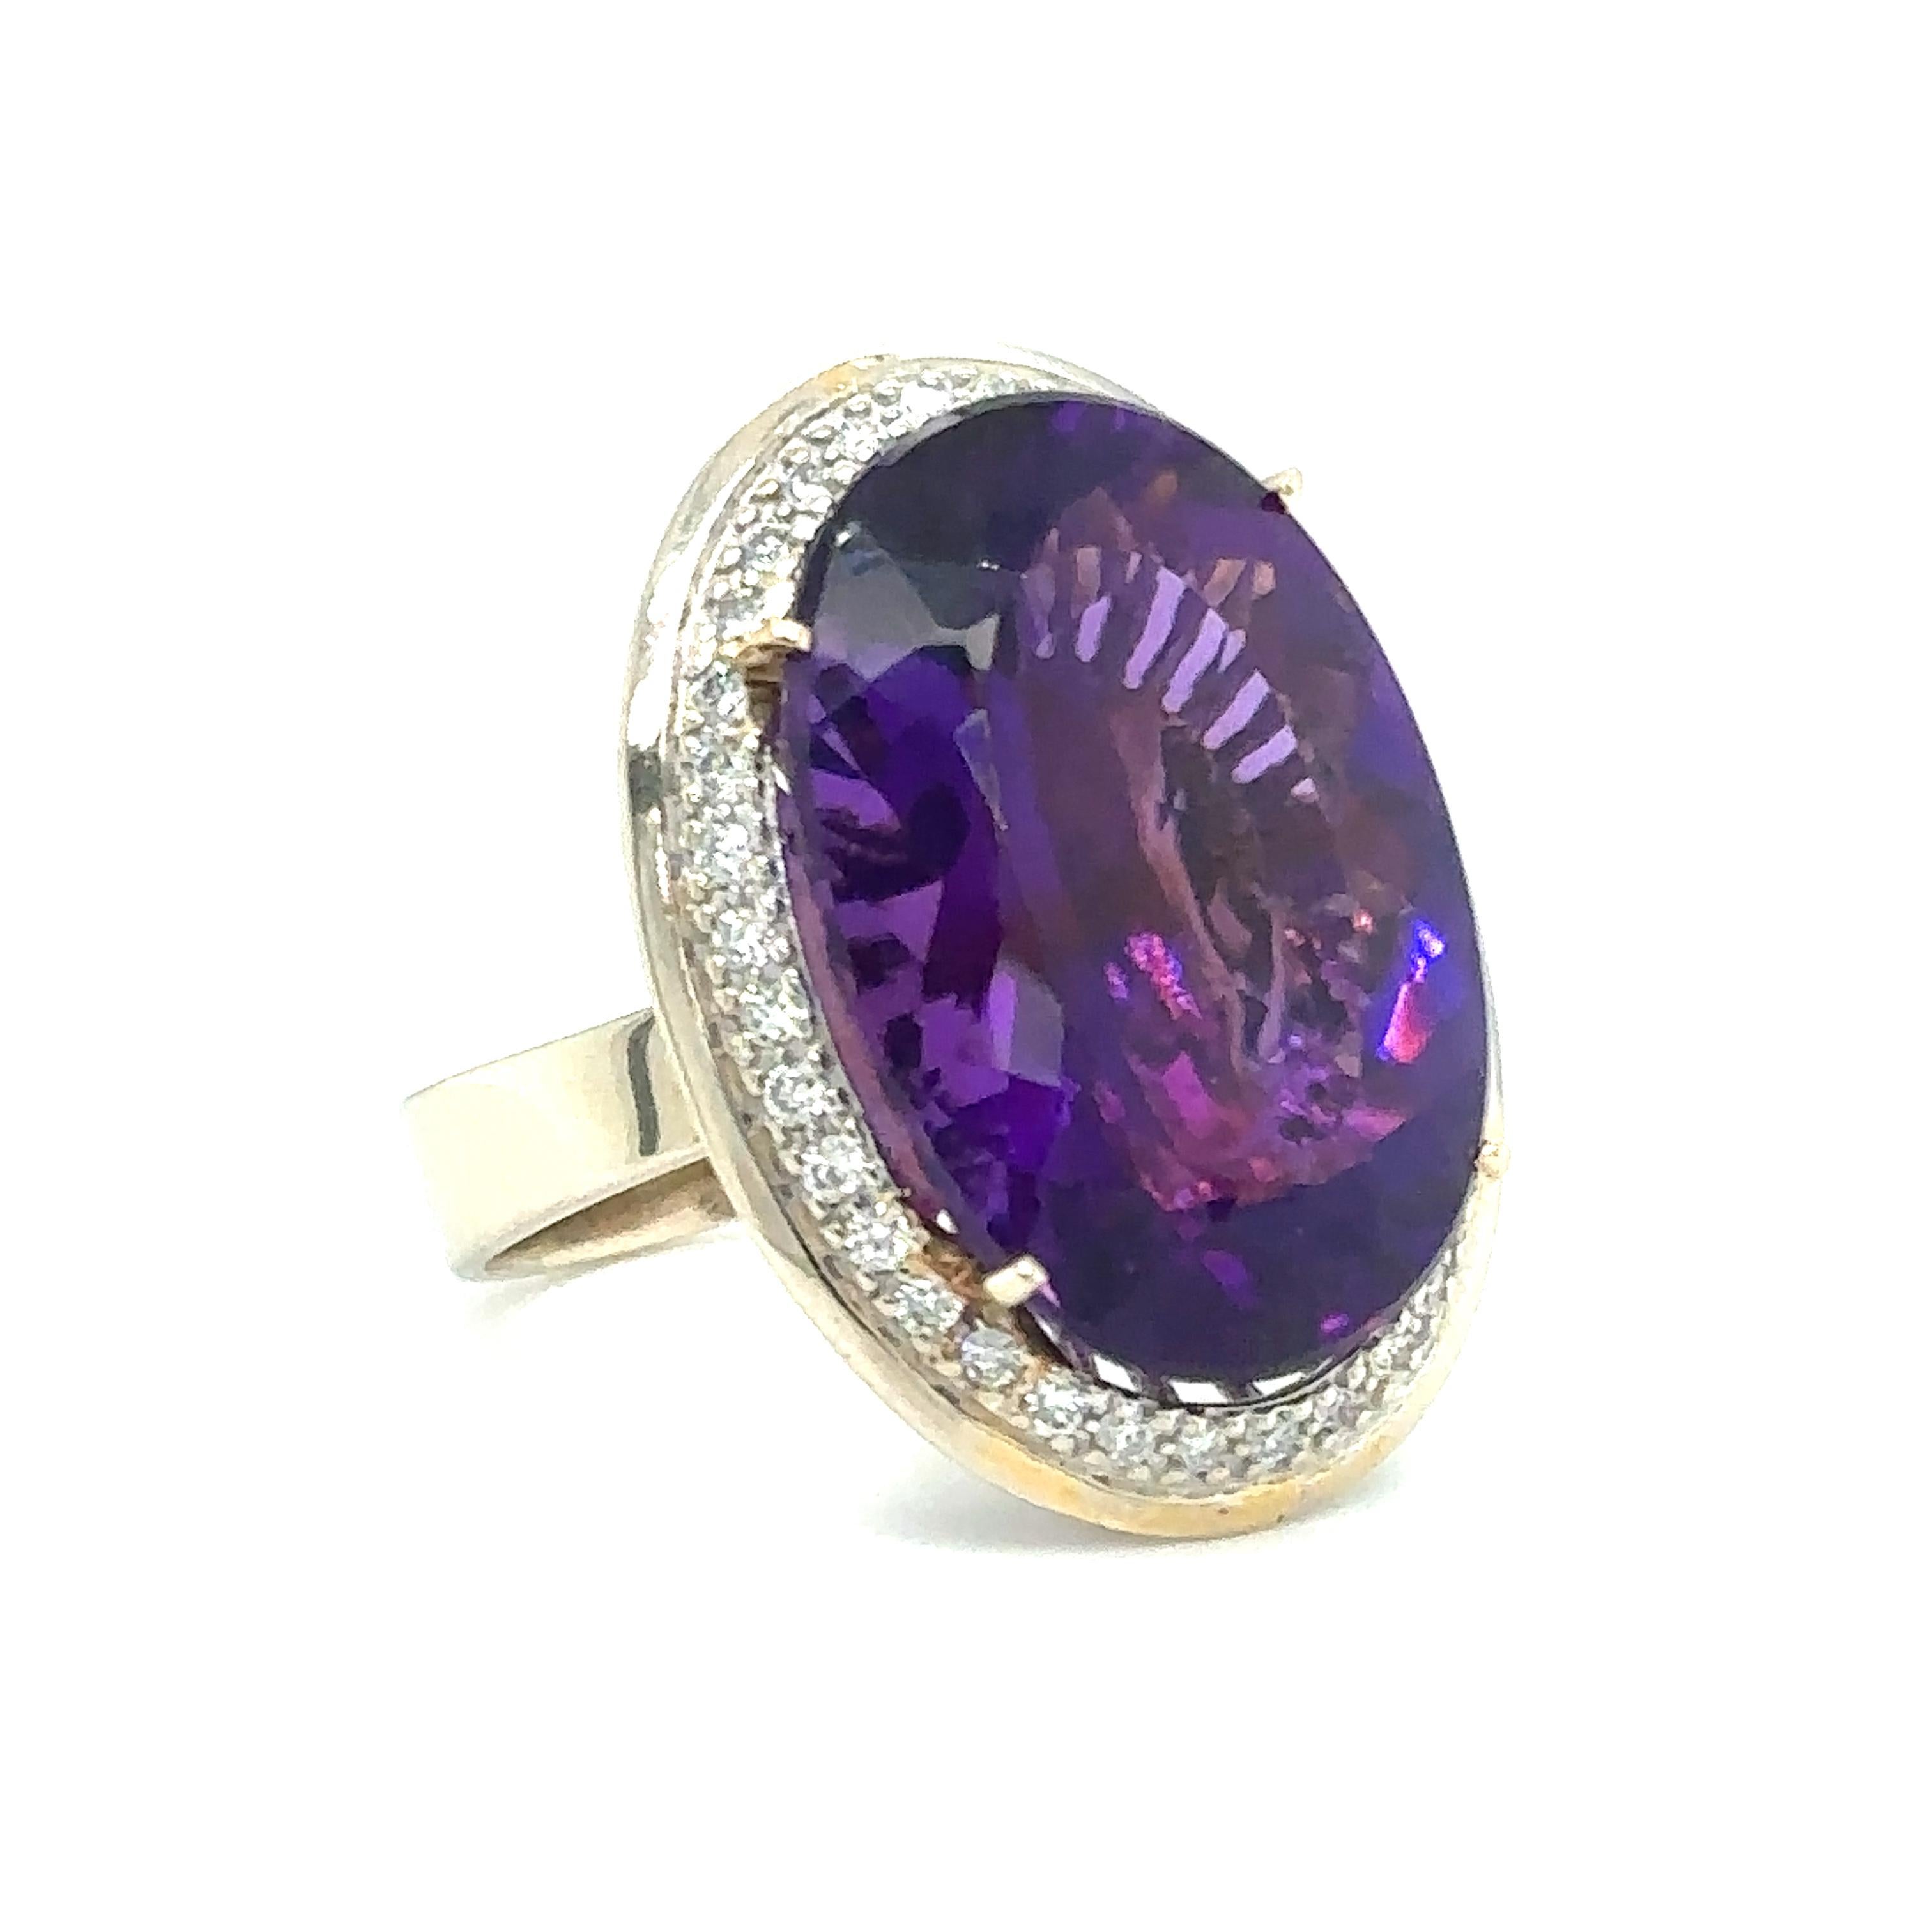 Oval Cut Large Oval Brilliant Amethyst Ring with Diamonds in 14 Karat Gold, circa 2000s For Sale